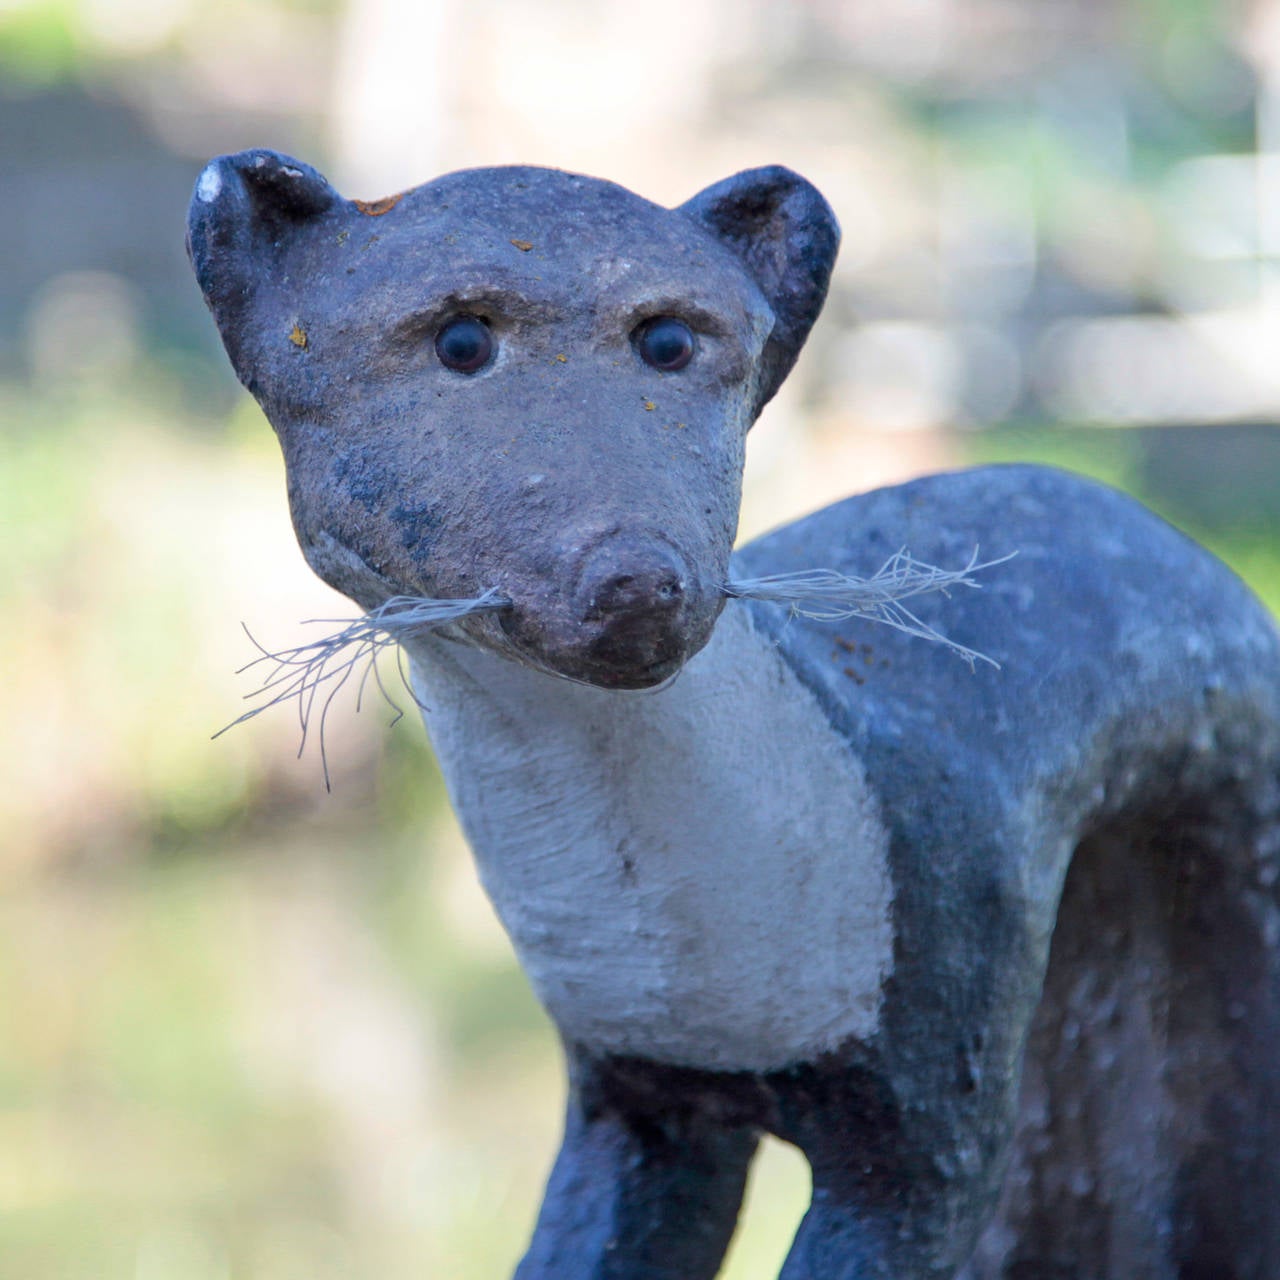 Mid-Century Modern Cast Stone Weasel Sculpture by Kiefer, from the 1950s.